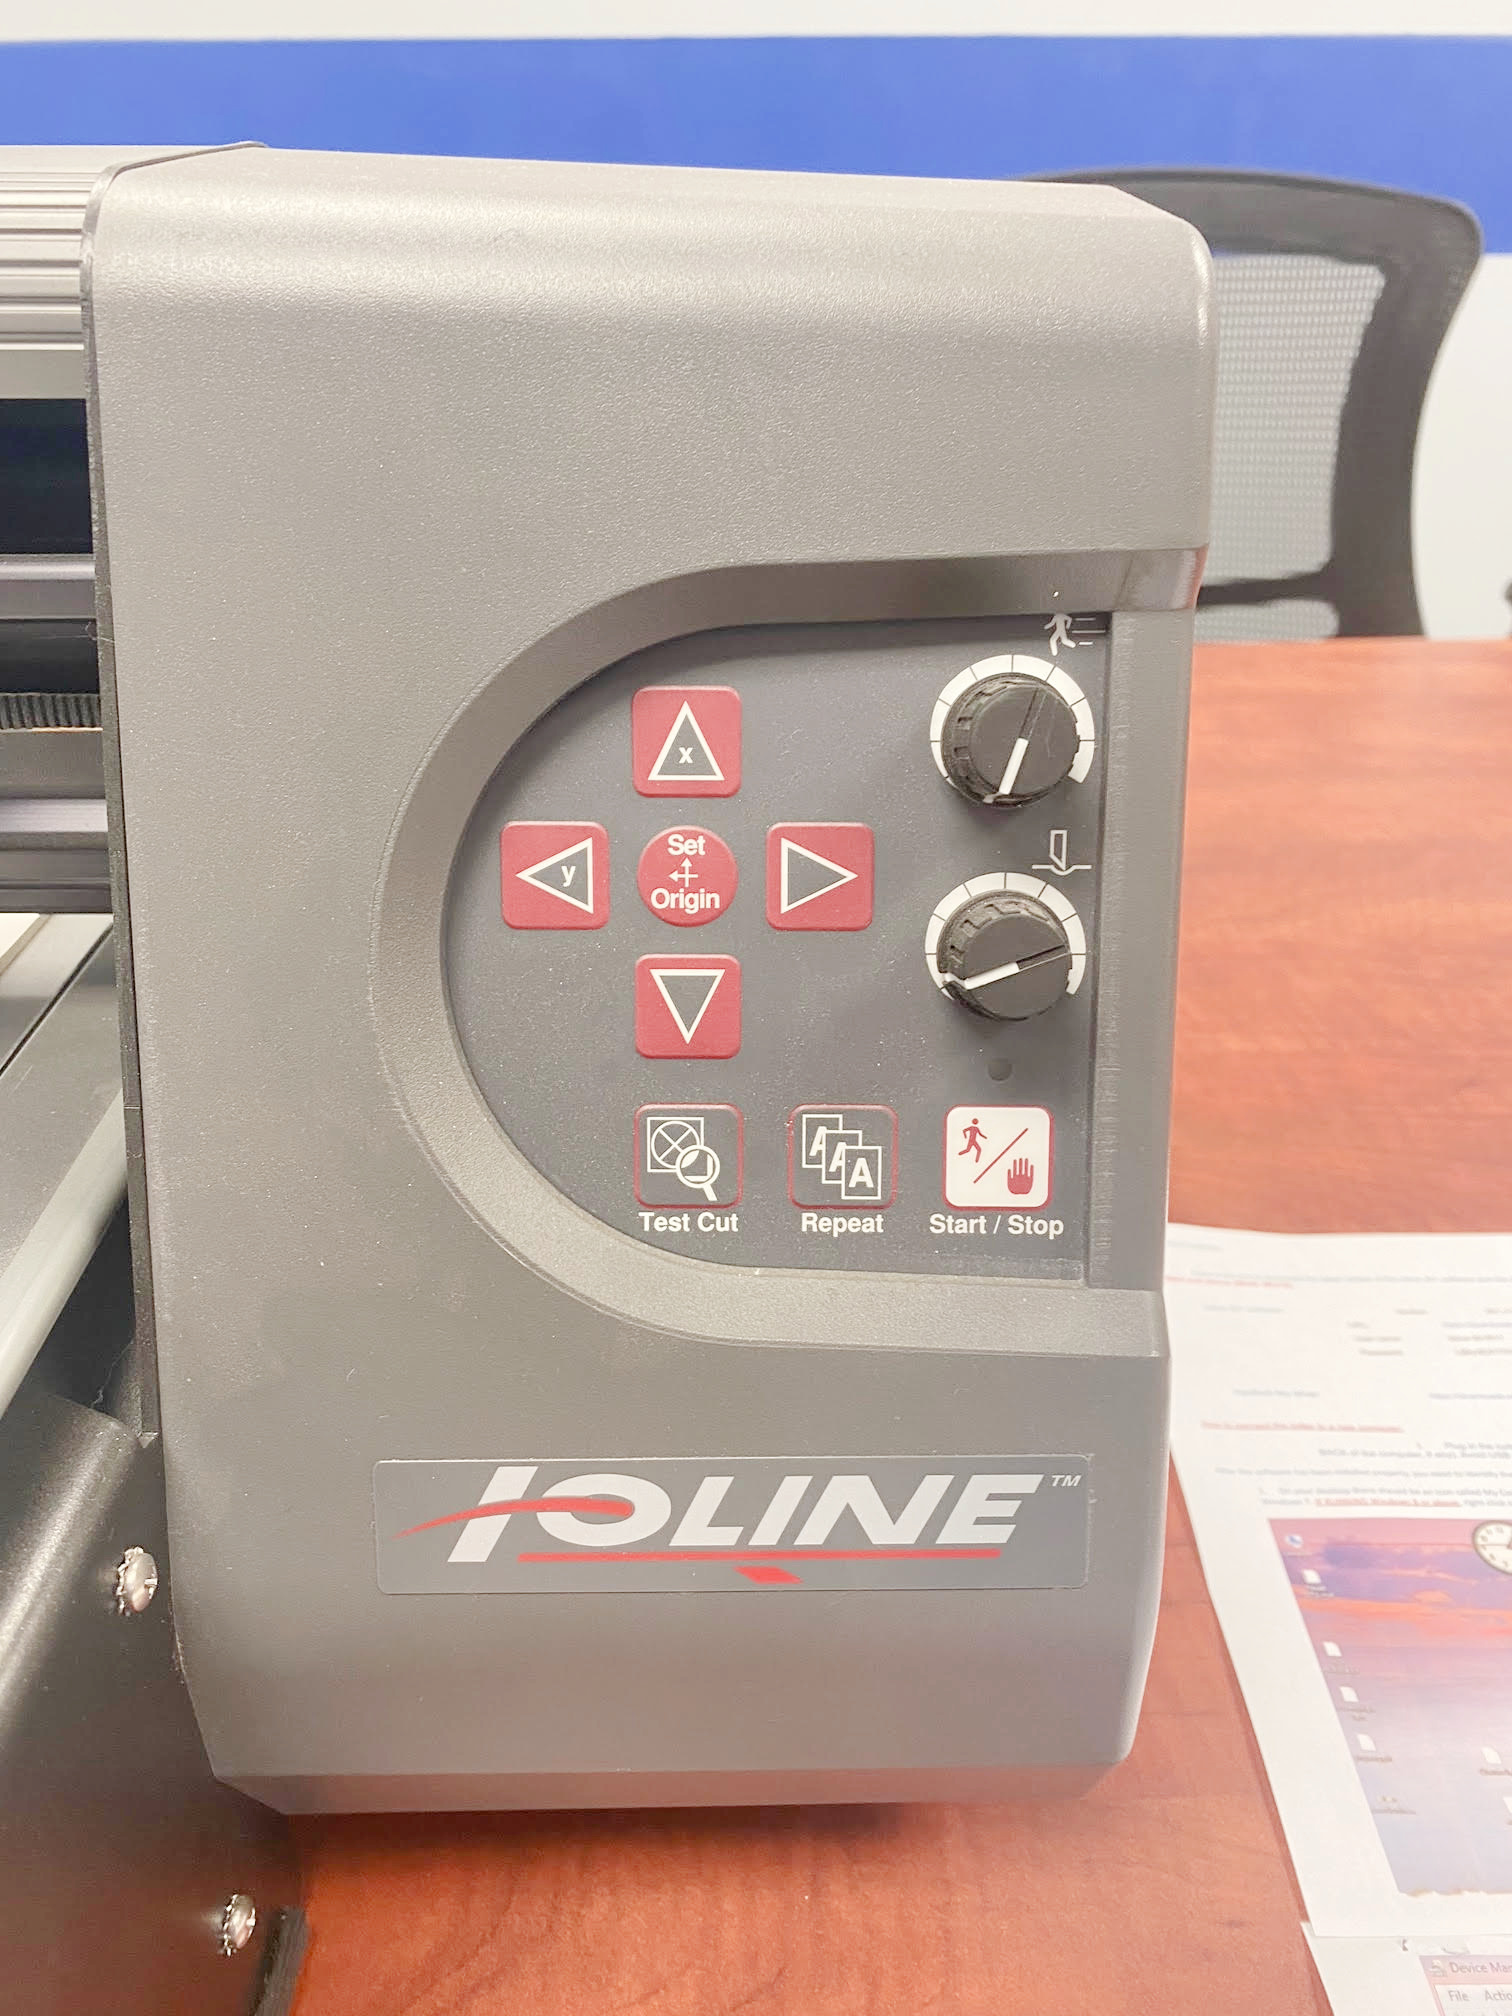 Ioline Applique Sports Lettering Cutter (used) Item # UE-102621E (Maryland)